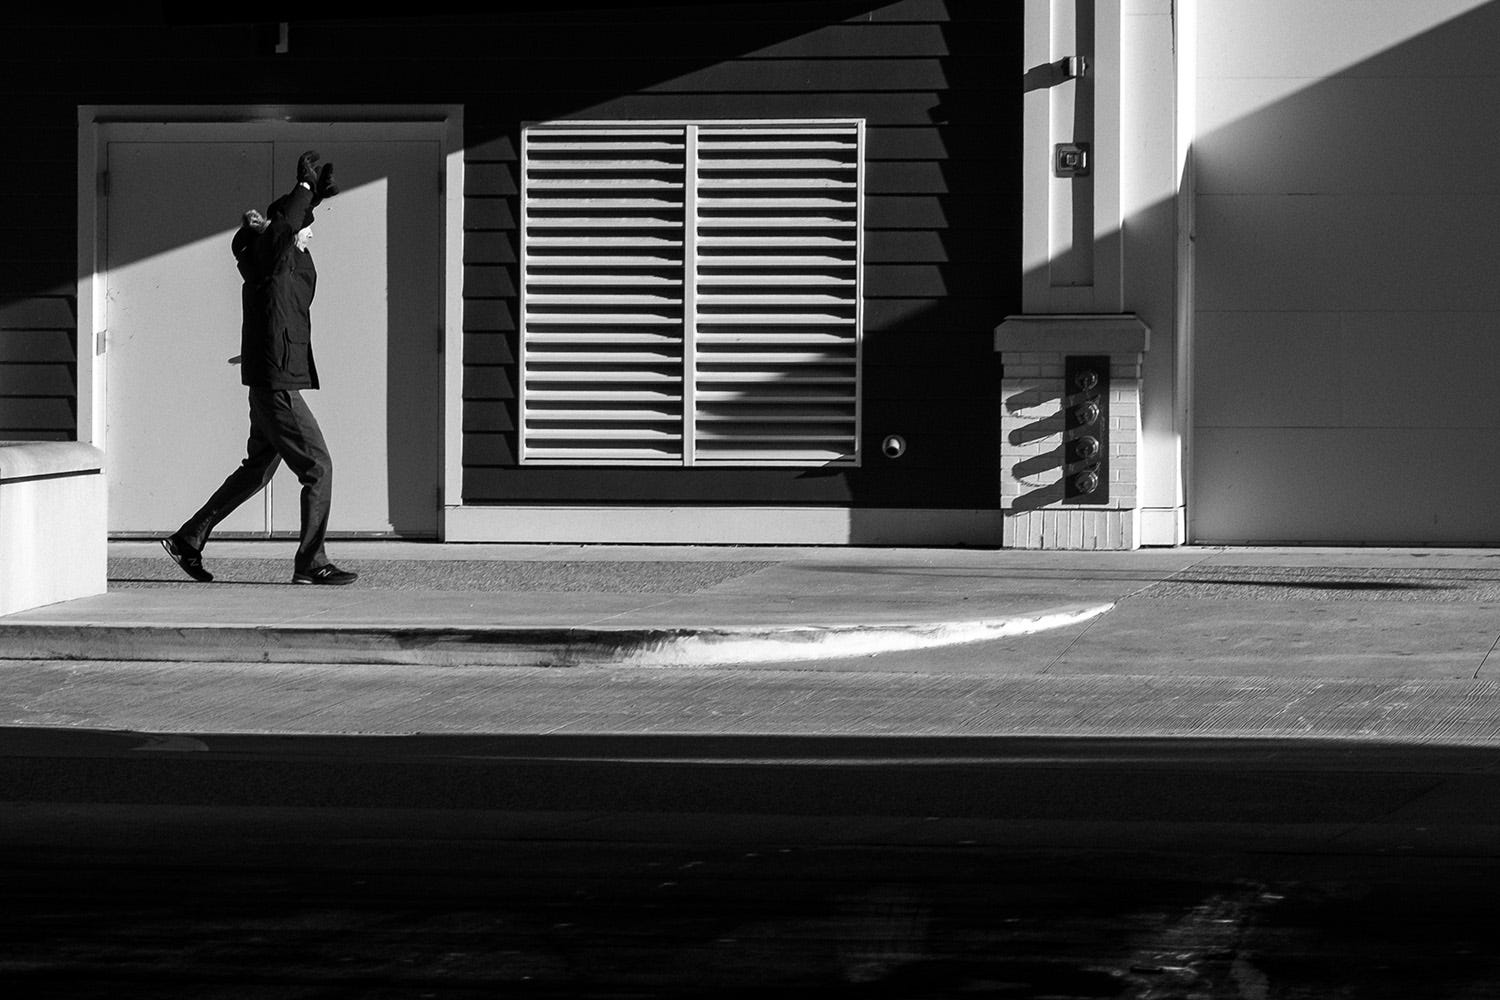 A man is walking down a light and shadow filled sidewalk. He is reaching over head similar to warm up exercises. 